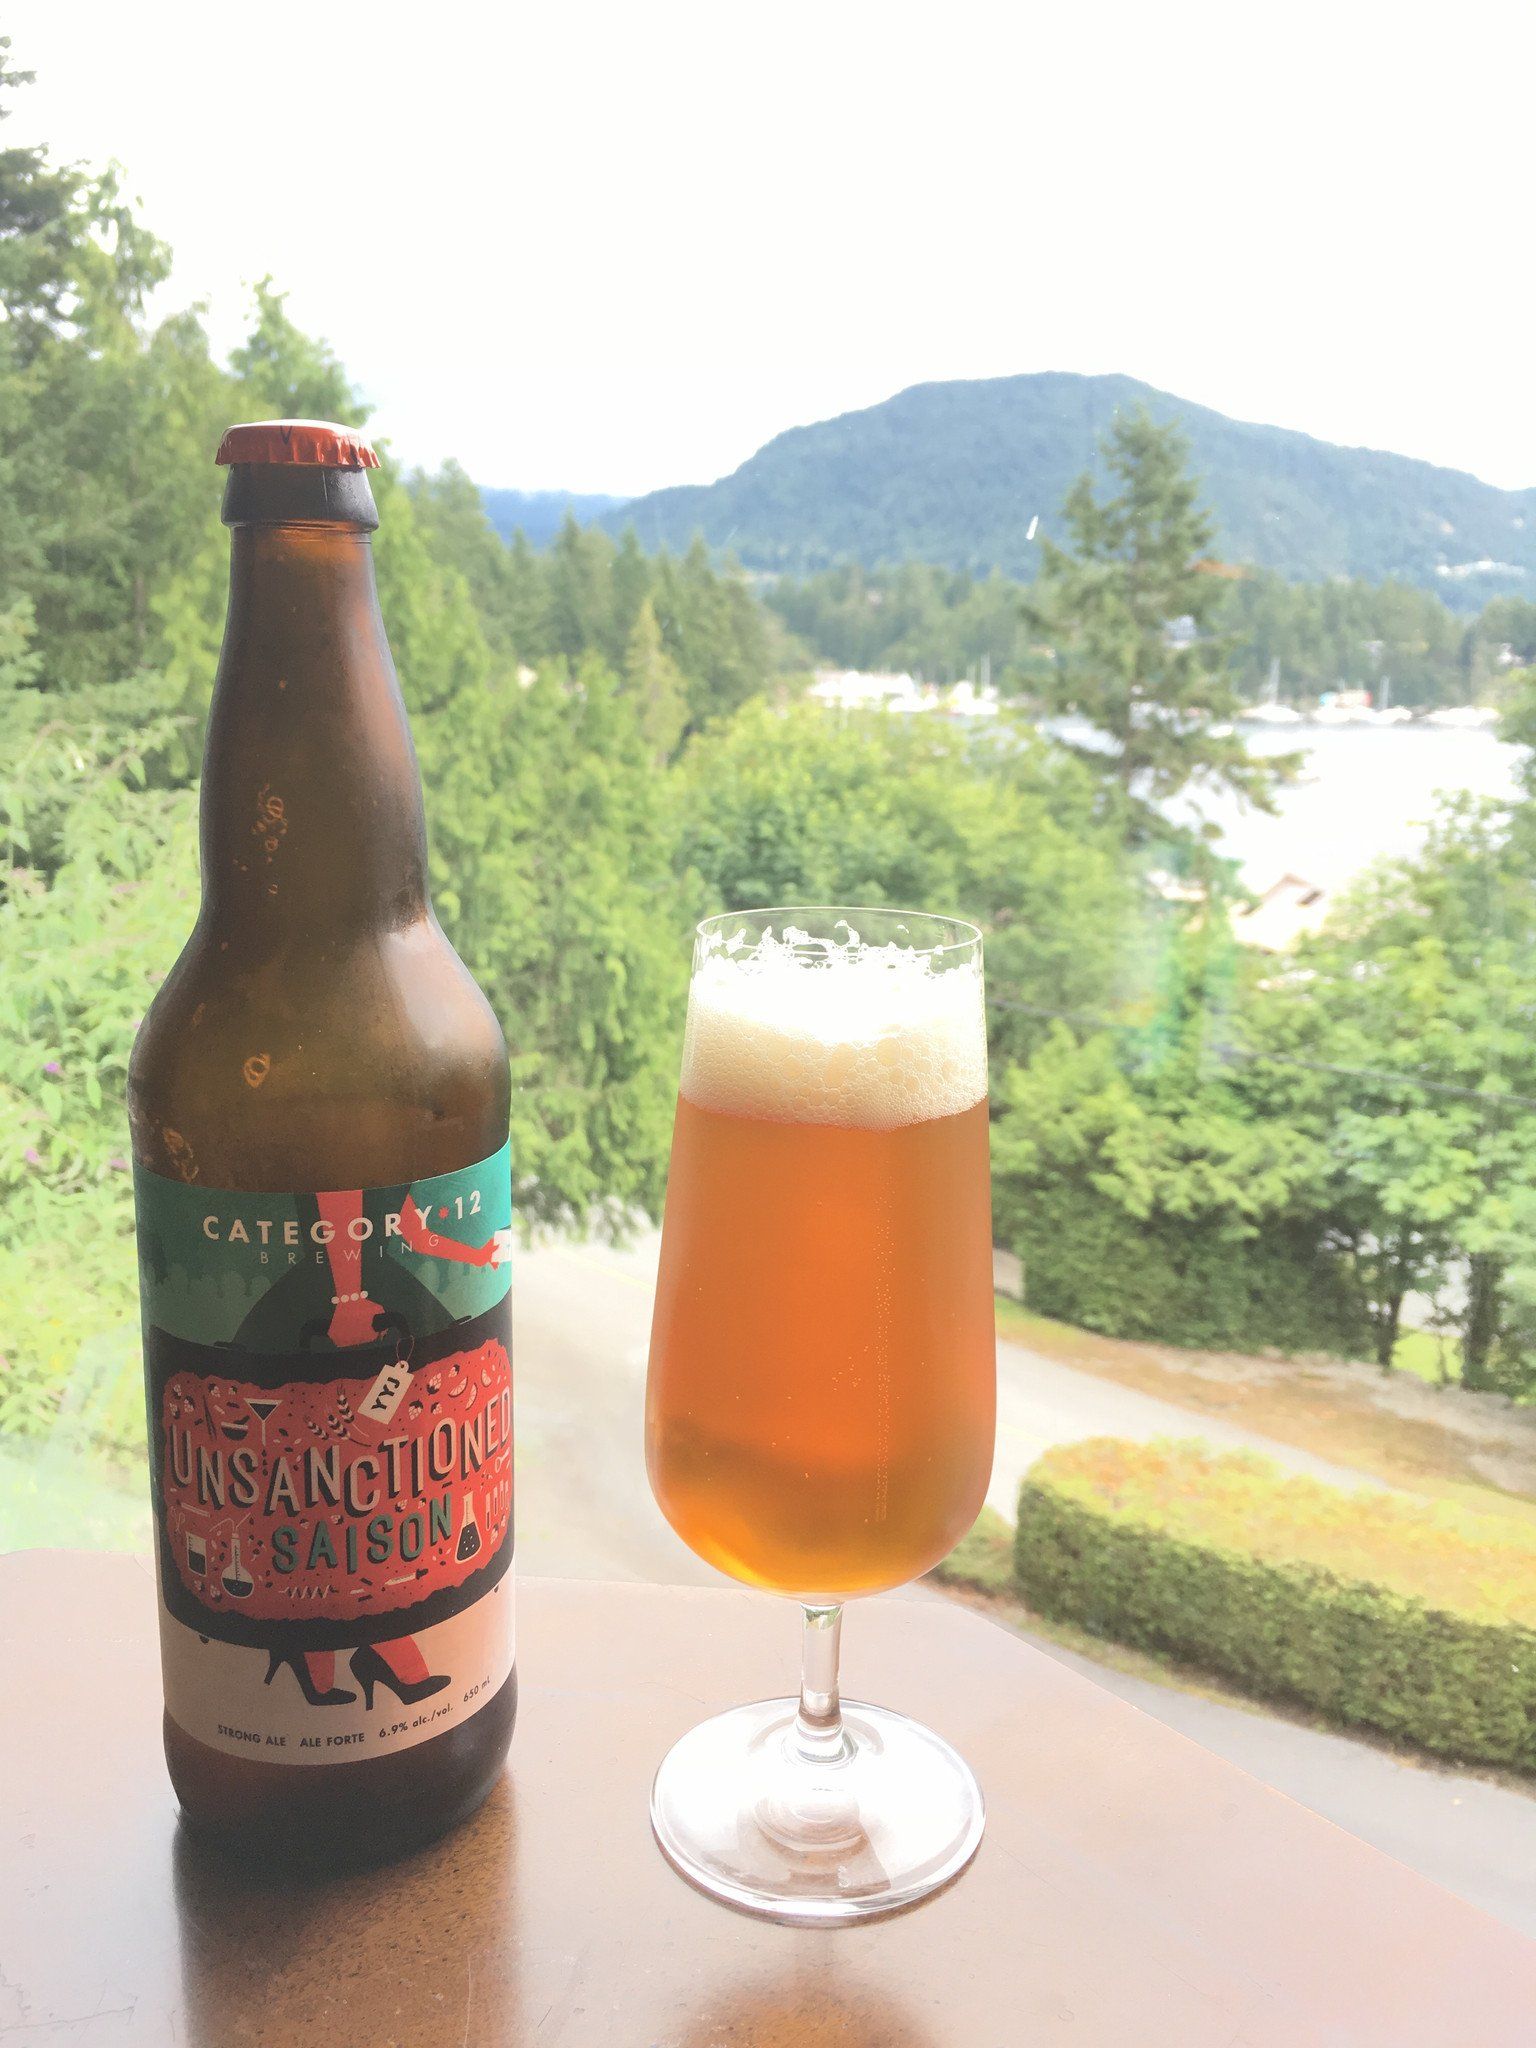 Beer Review - Category 12's Unsanctioned Saison